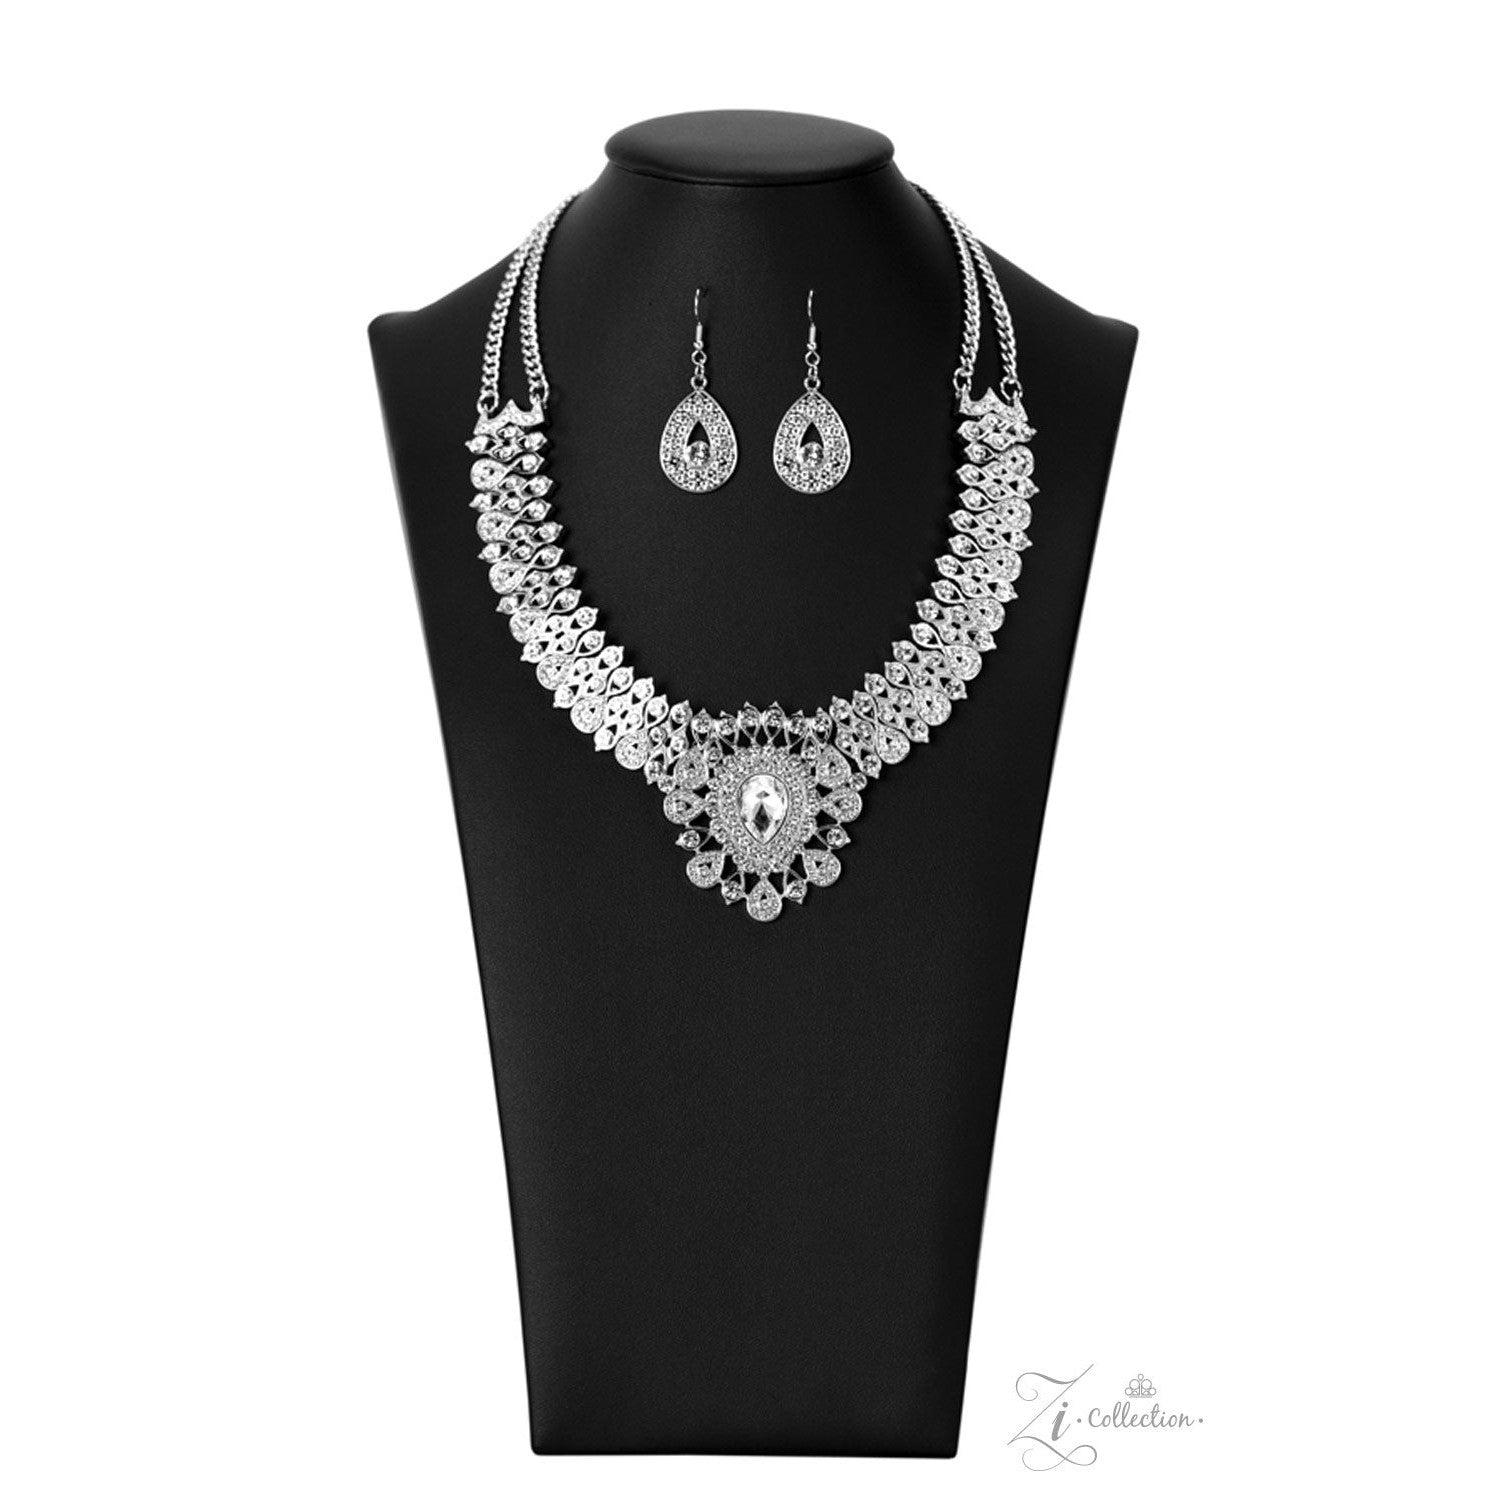 Exquisite 2022- Paparazzi Zi Collection Necklace - Bling by Danielle Baker